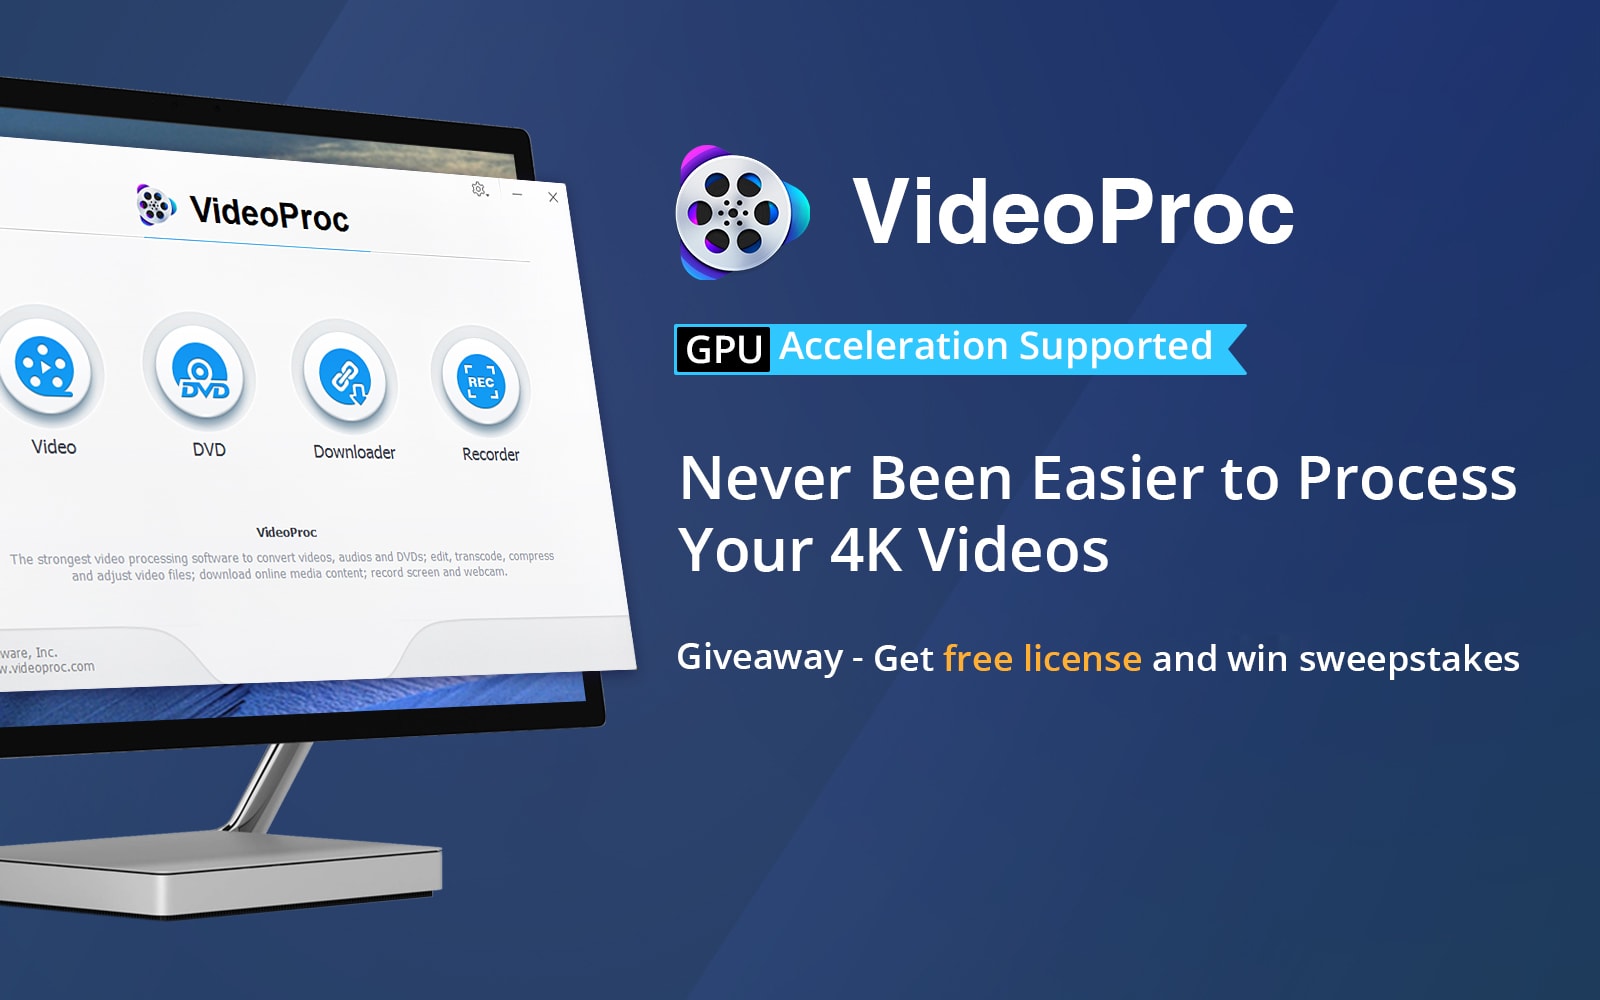 With VideoProc, processing 4K video doesn't have to take forever.